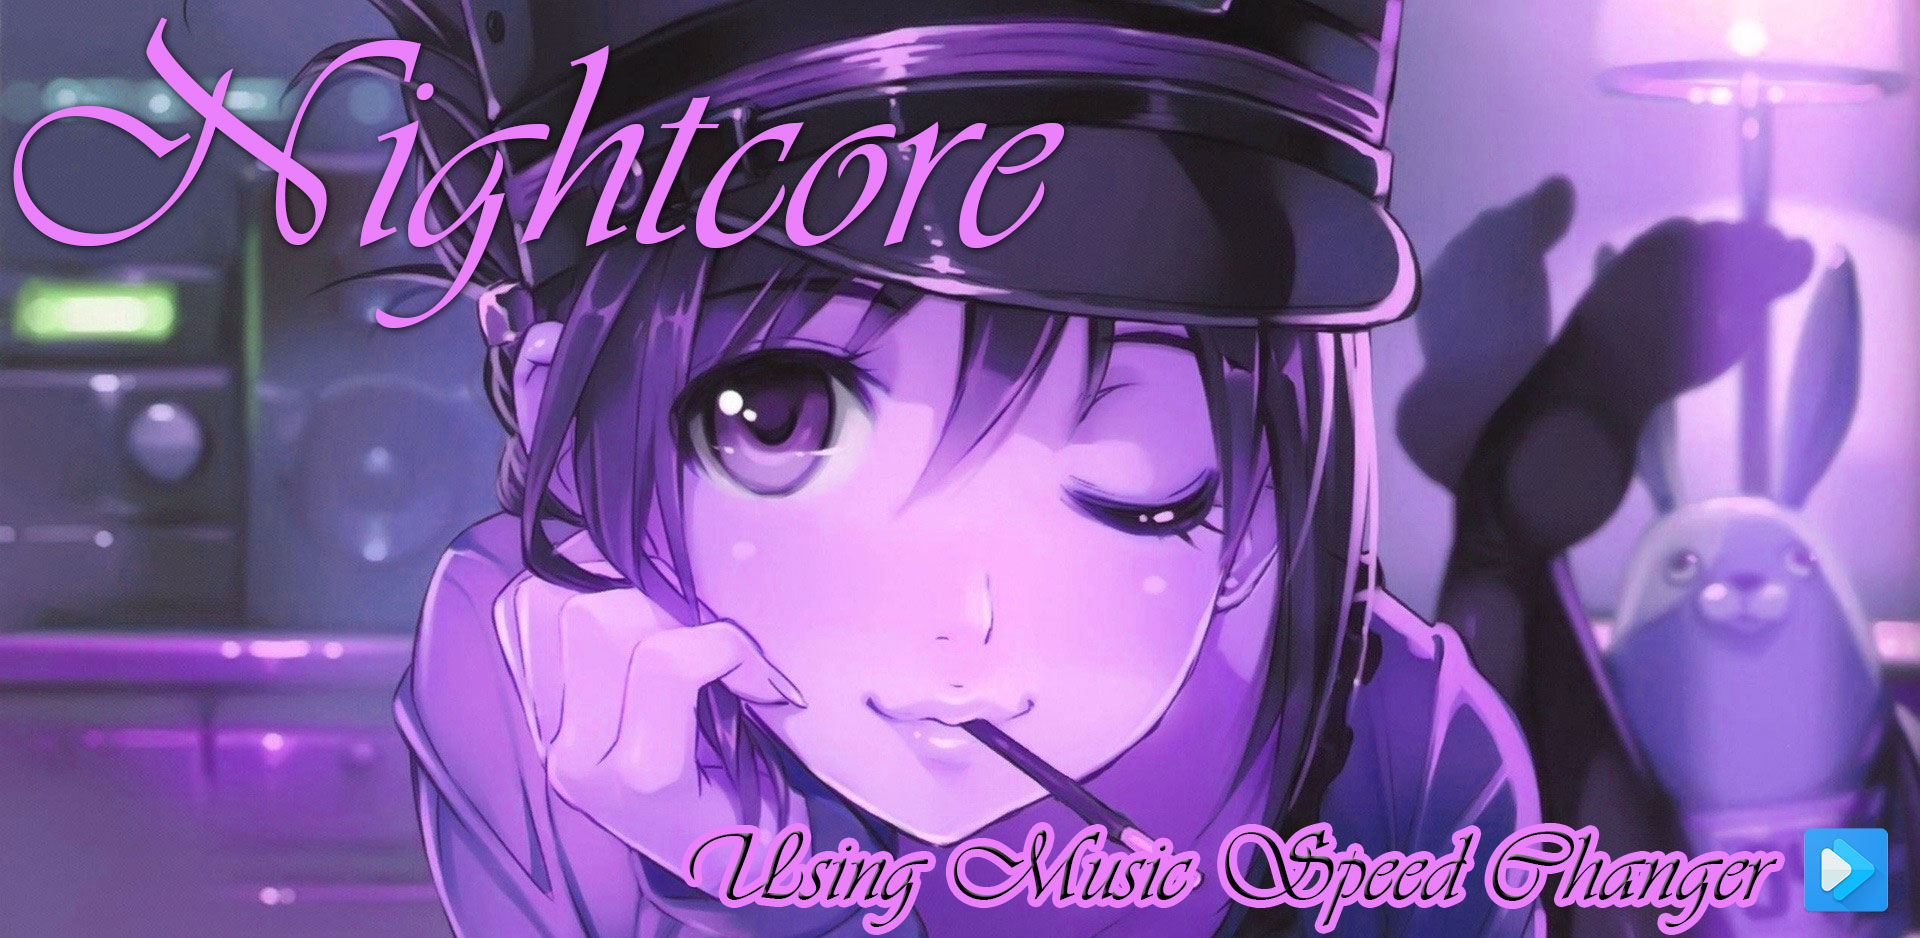 How-to Make Nightcore with Music Speed Changer